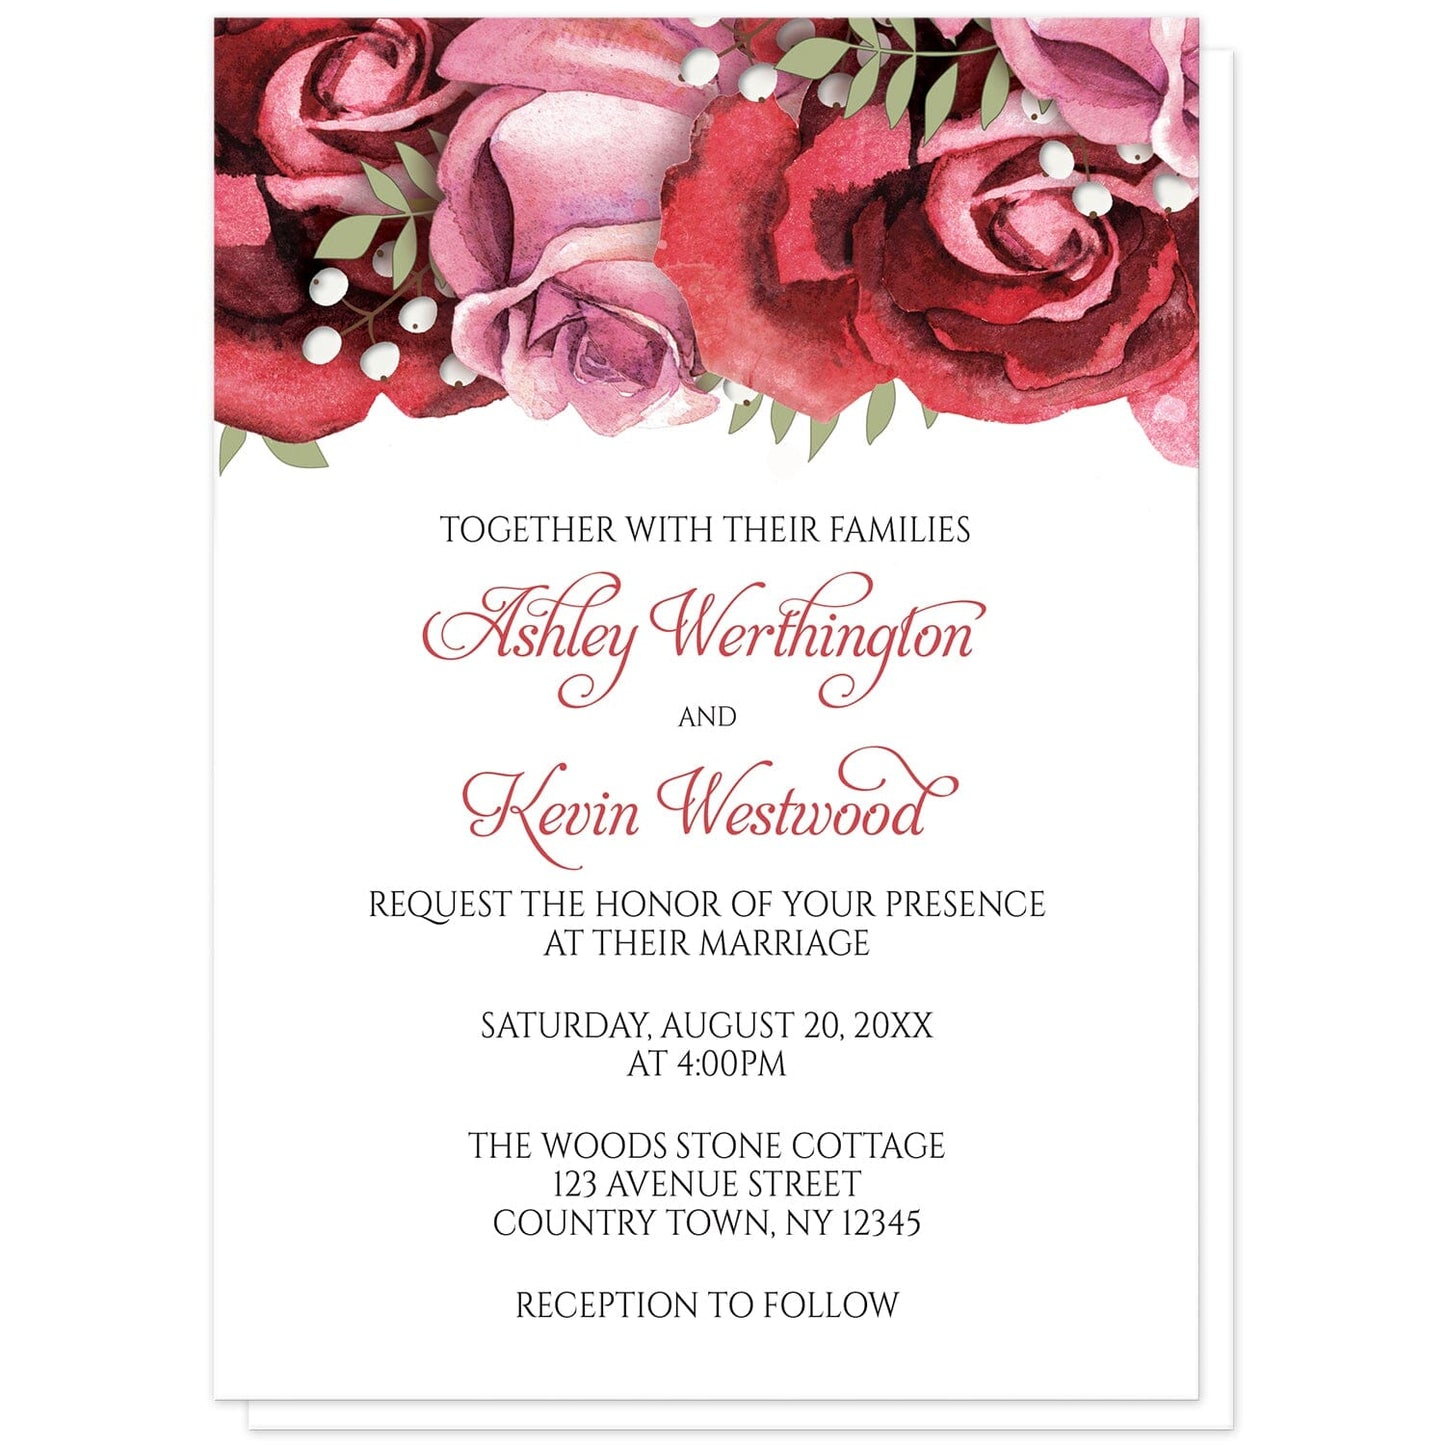 Burgundy Red Pink Rose Wedding Invitations at Artistically Invited. Beautiful burgundy red pink rose wedding invitations with gorgeous burgundy red and pink roses along the top. Your personalized marriage celebration details are custom printed in in burgundy and black on white below the pretty roses. 